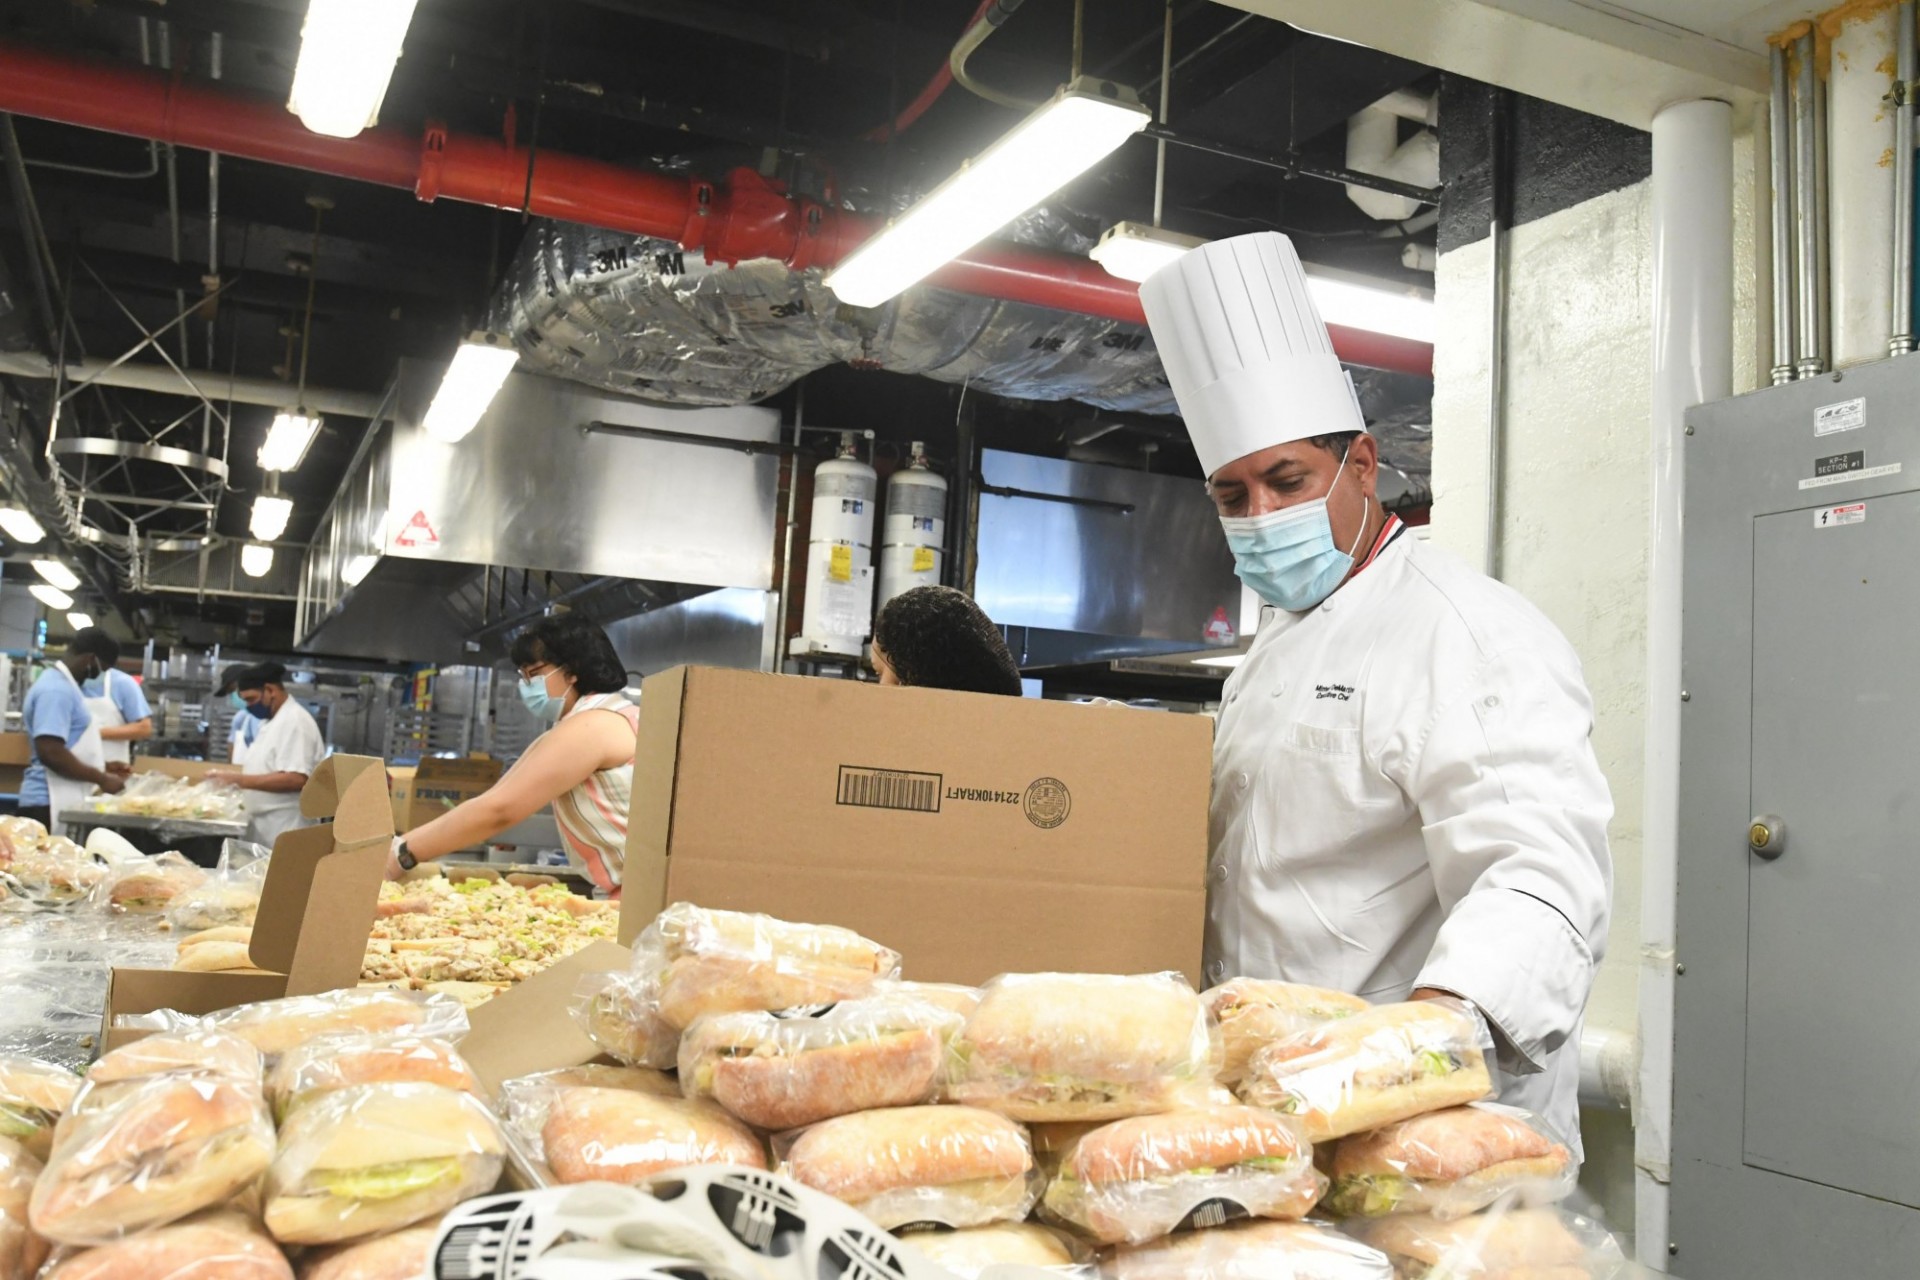 Chef Mike packs the wrapped sandwiches into a box for delivery